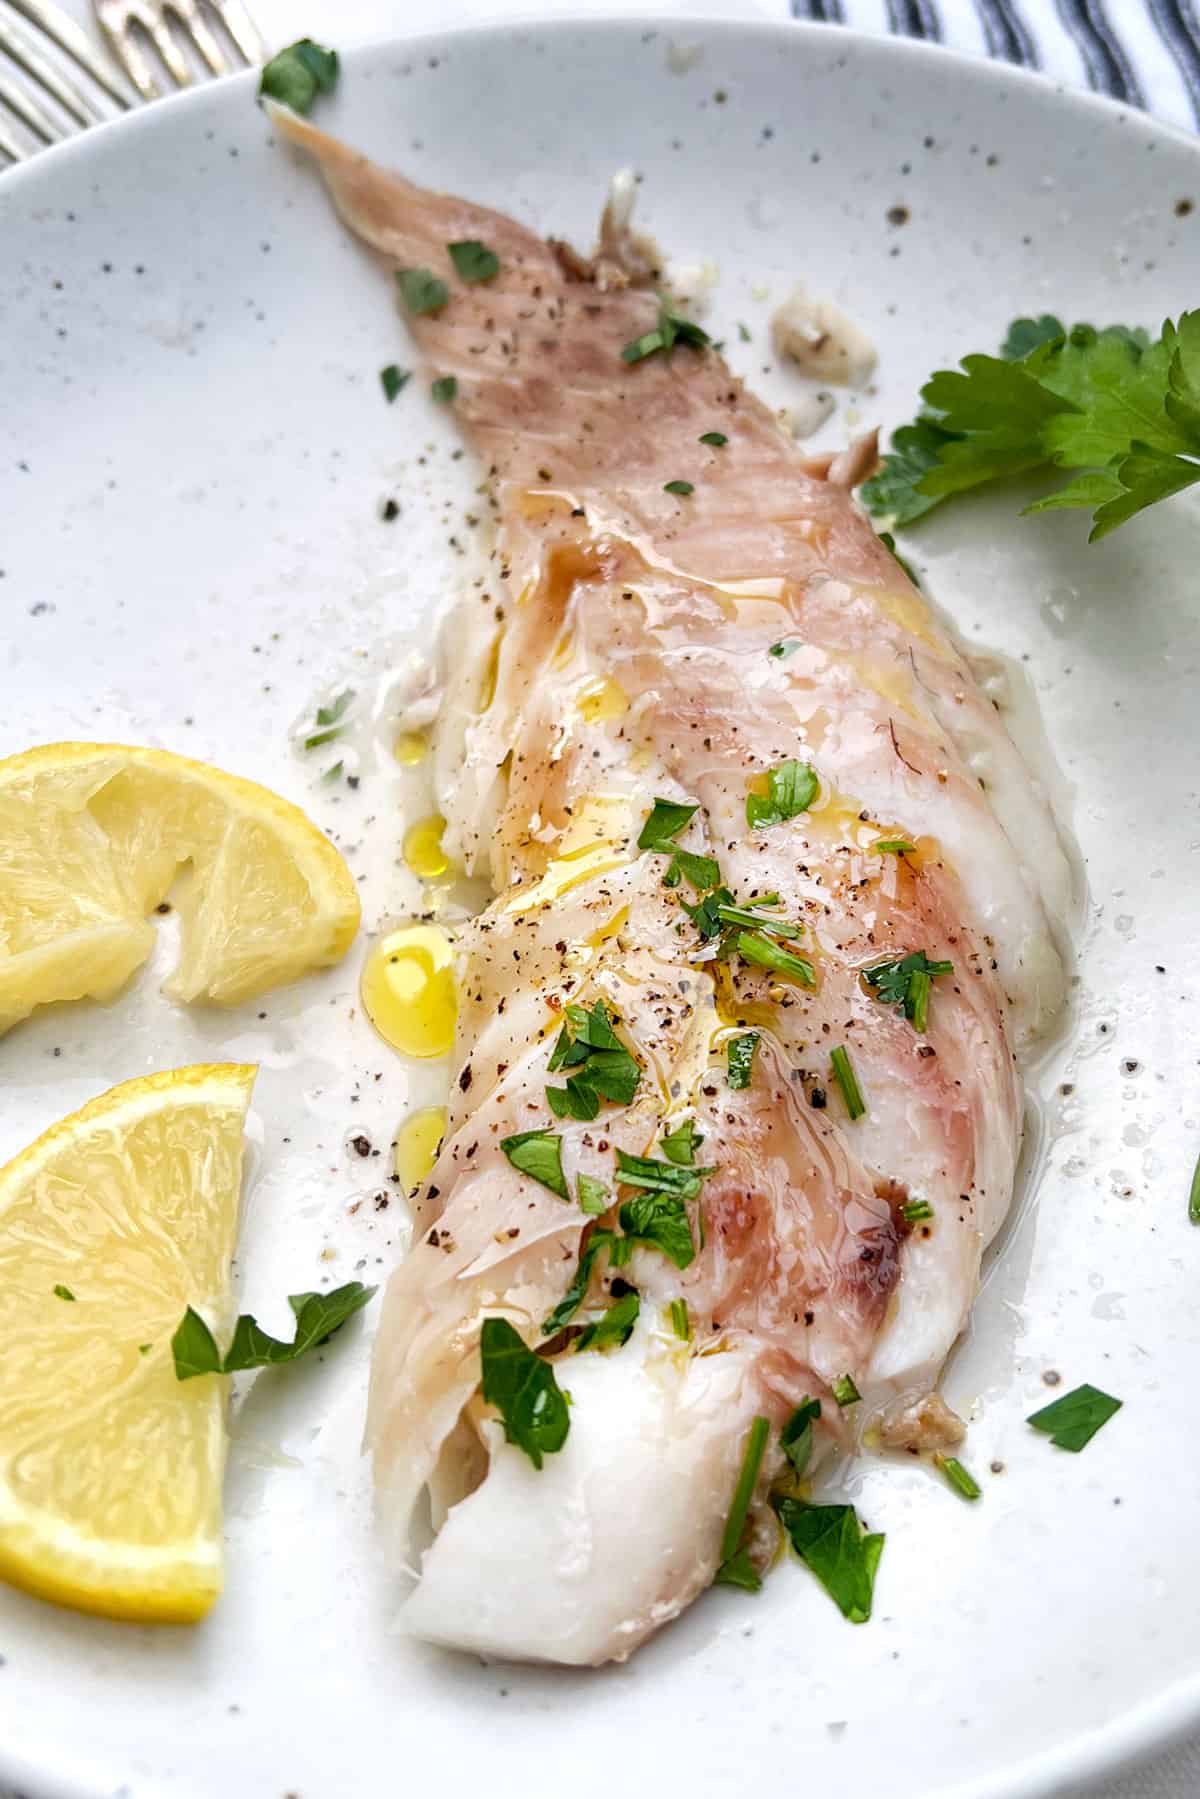 A portion of red snapper on a plate with olive oil, lemon slices and parsley